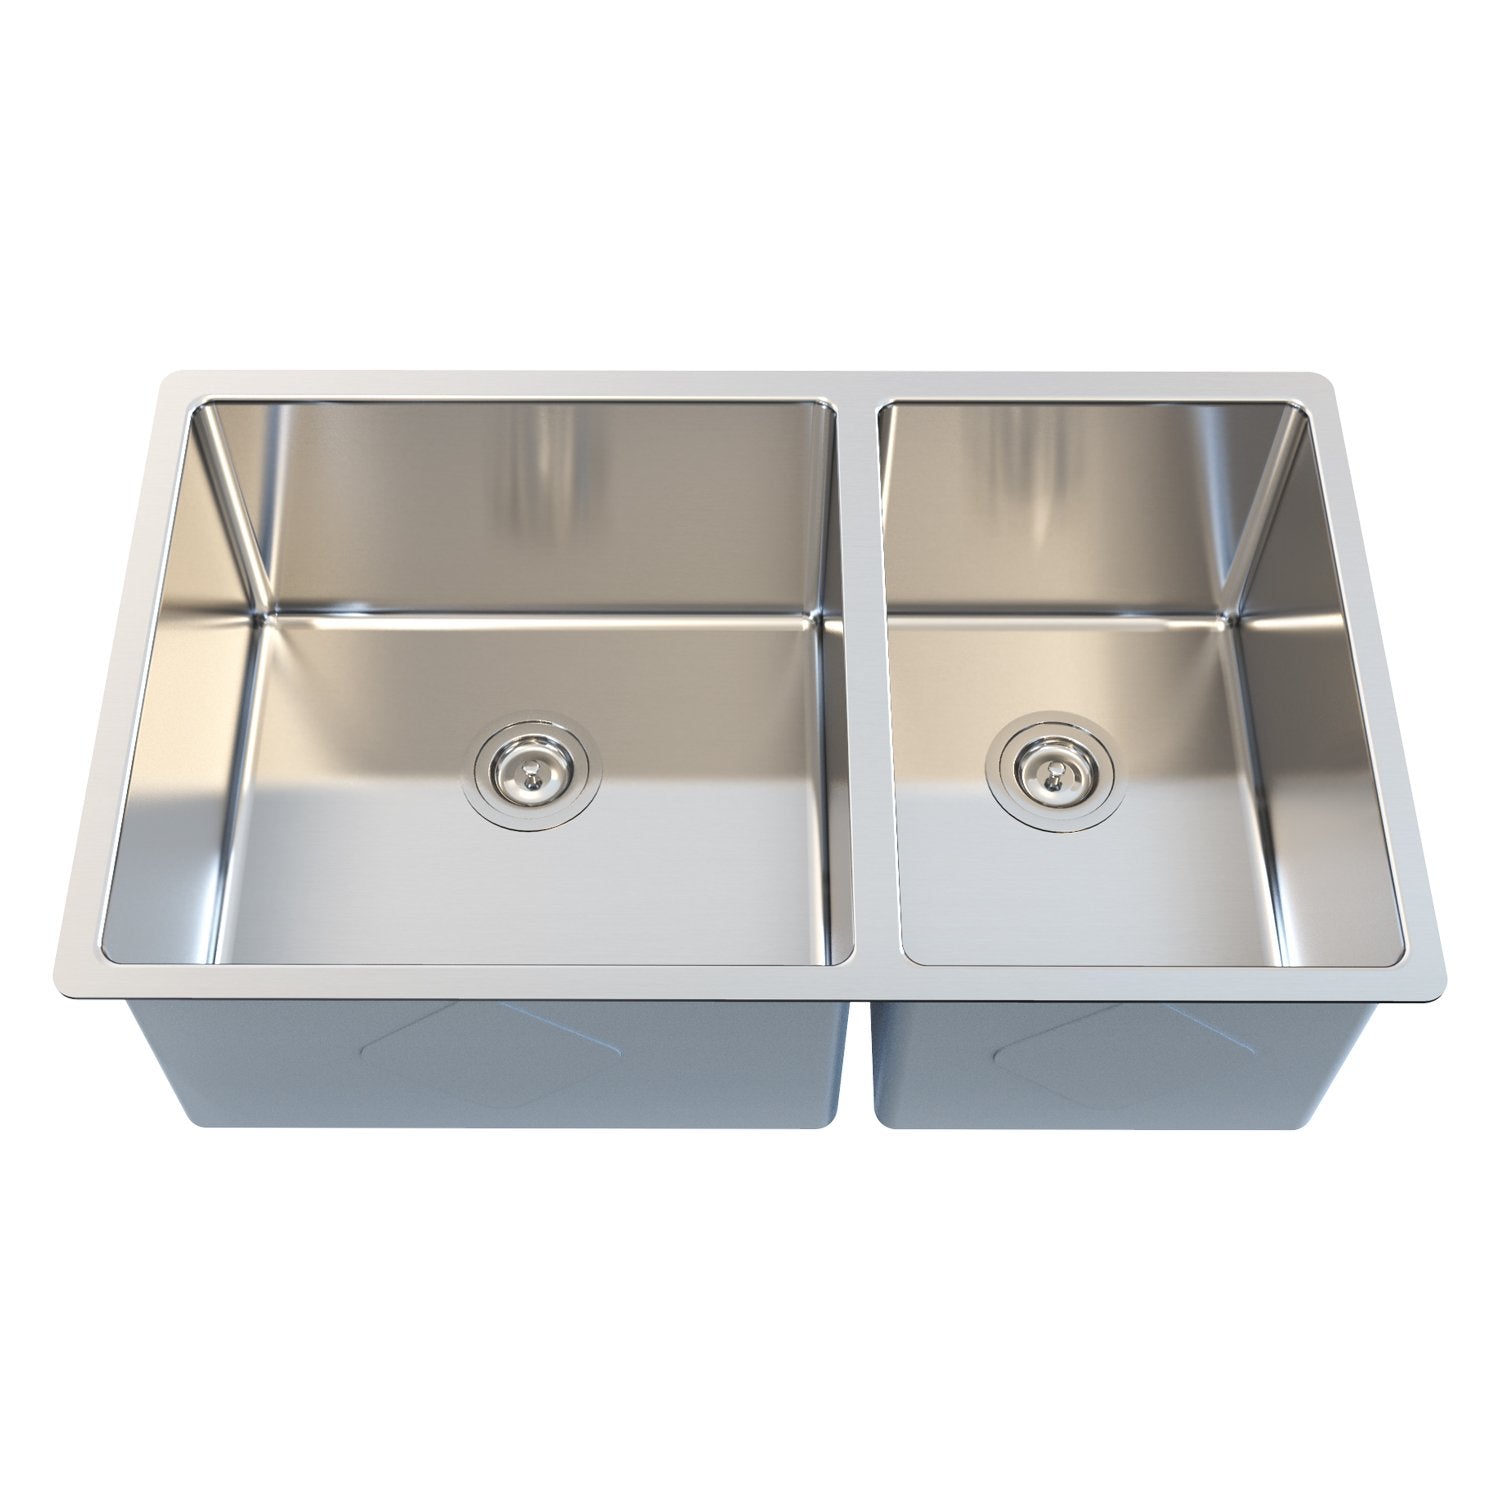 DAX Handmade 60/40 Double Bowl Undermount Kitchen Sink, 18 Gauge Stainless Steel, Brushed Finish, 32 x 19 x 10 Inches (KA-3219LR10)